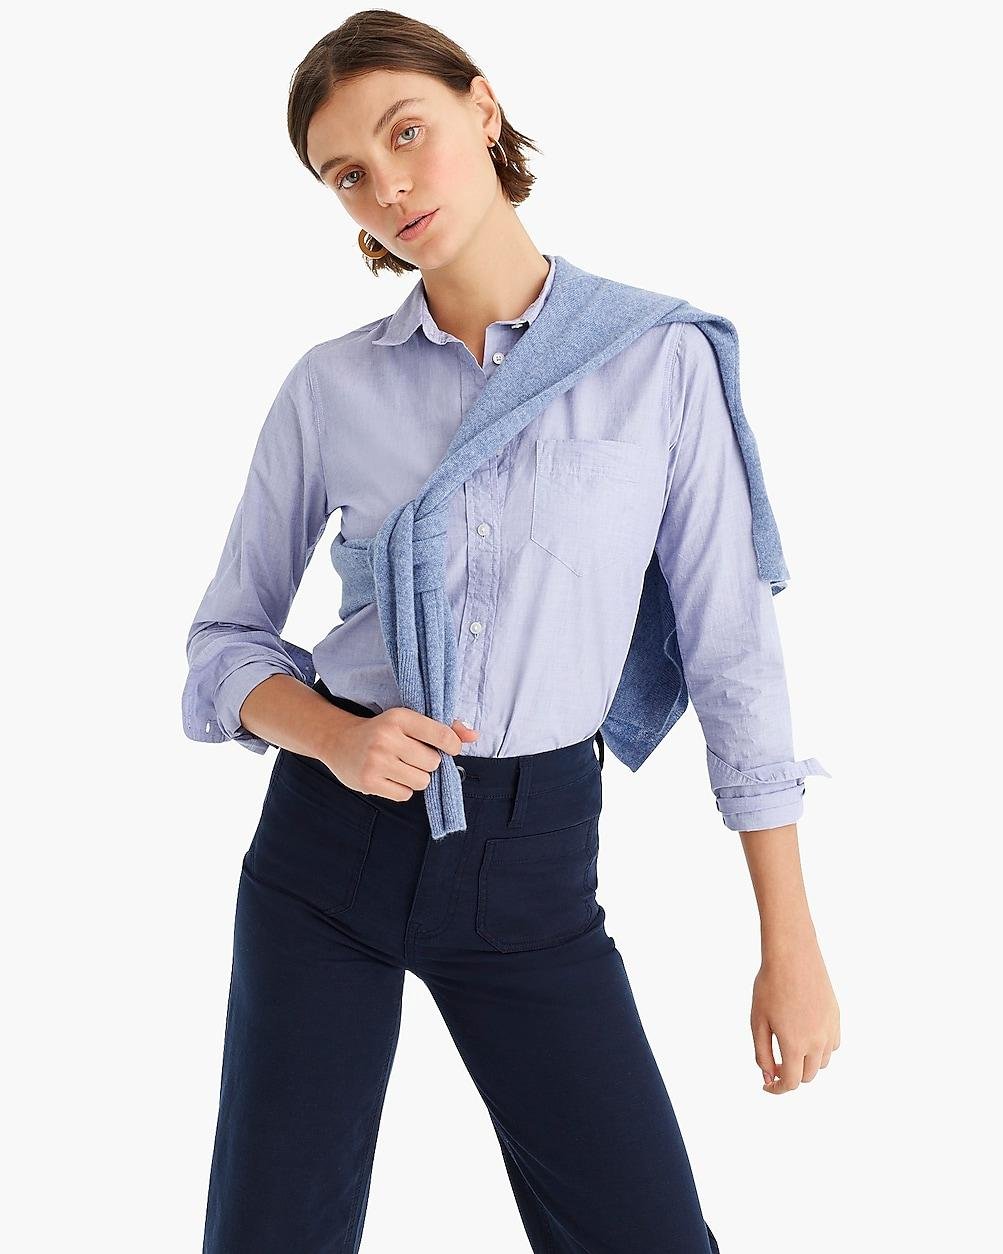 Classic-fit boy shirt in end-on-end cotton by J.CREW